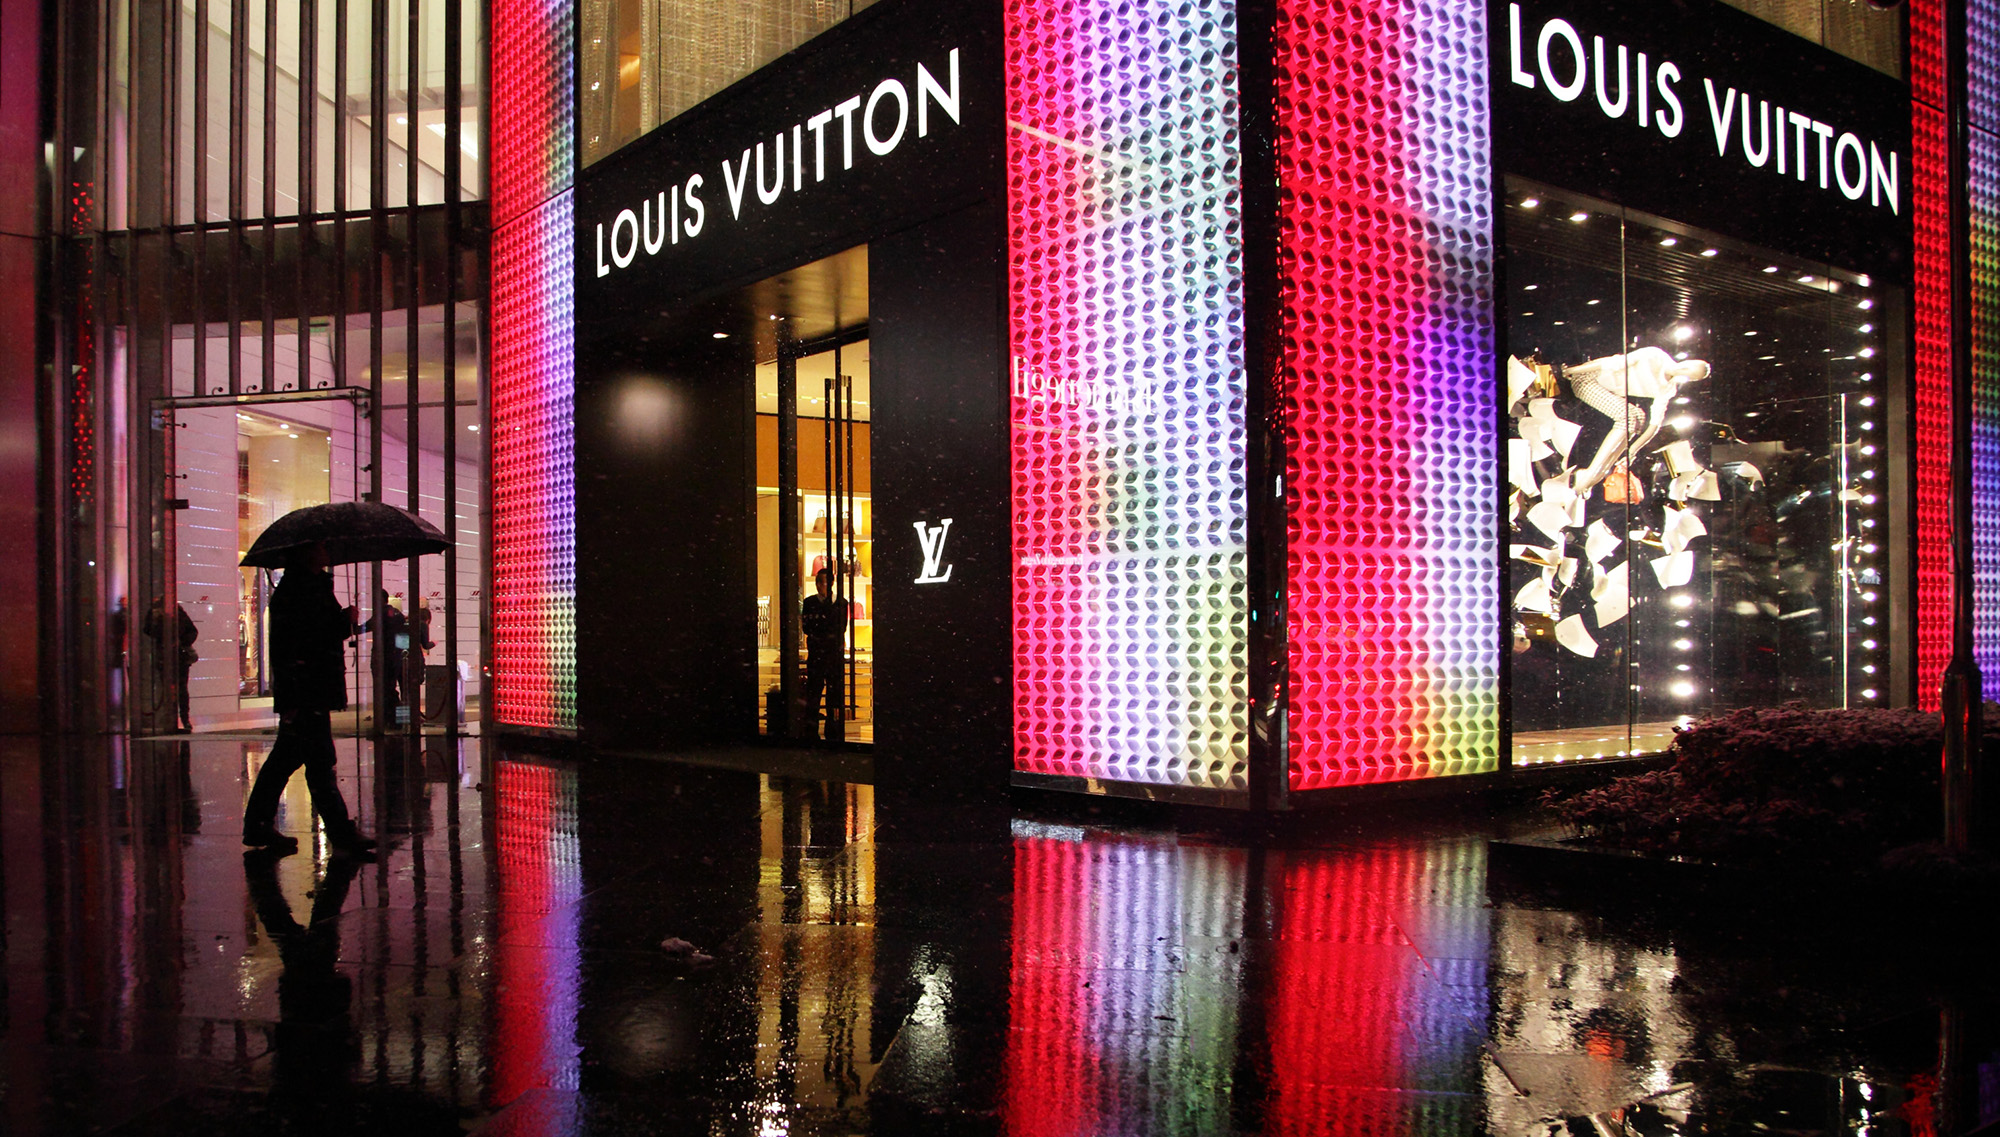 LVMH stock surges to record-high following earnings beat 